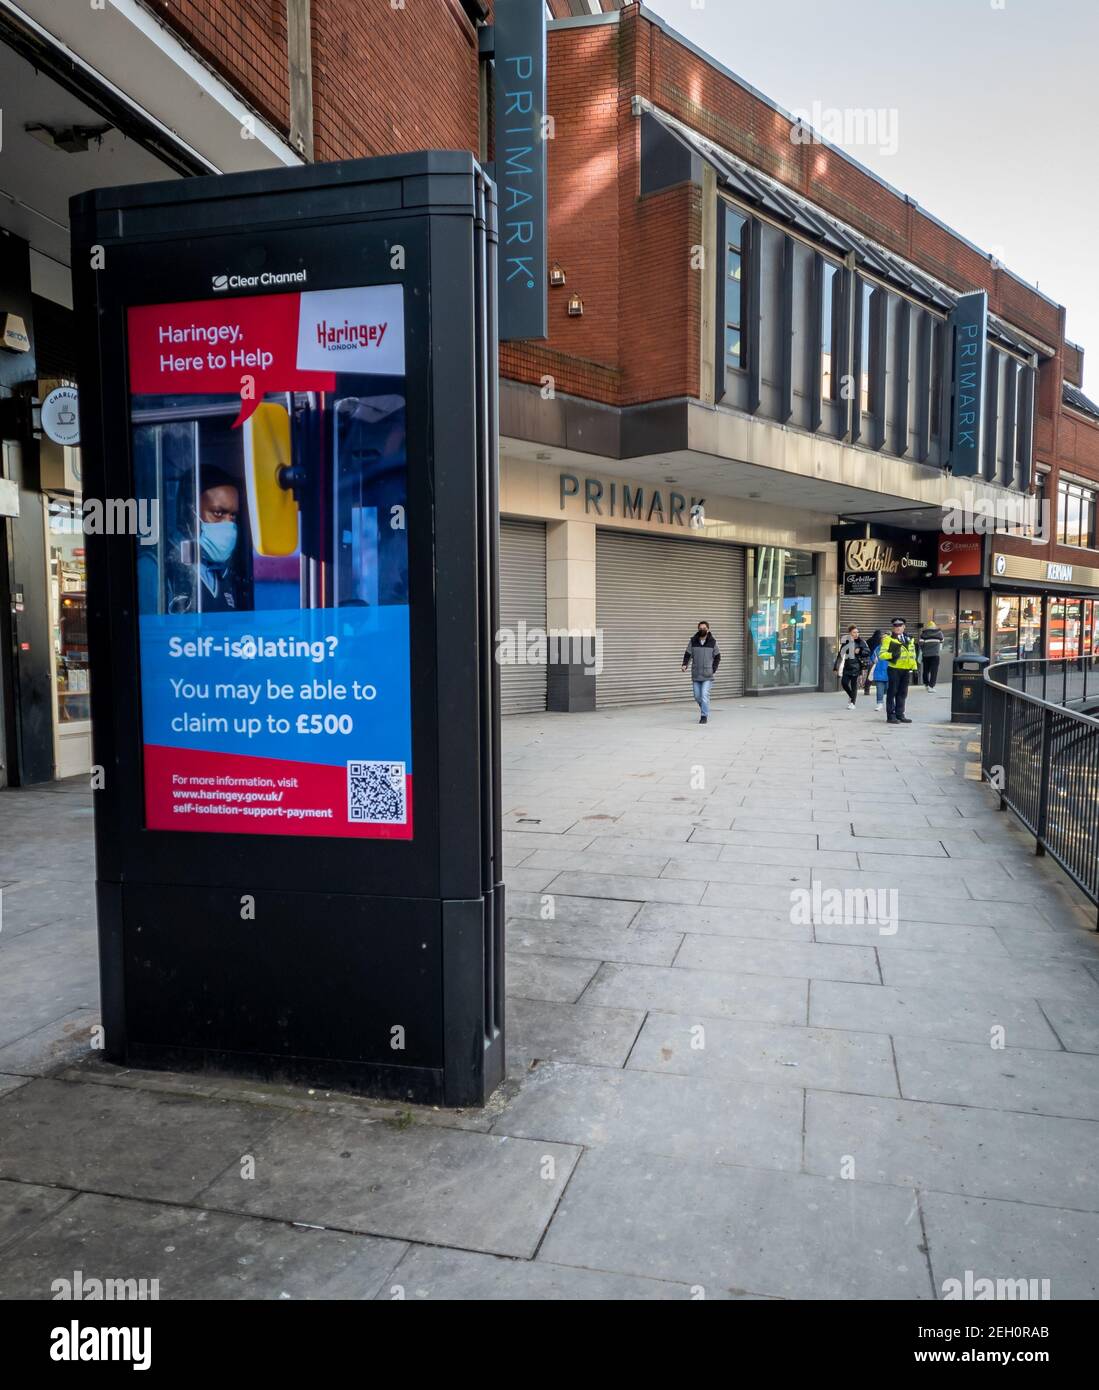 A government Covid-19 information billboard on the high street offering financial support for people self isolating during the national lockdown. Stock Photo